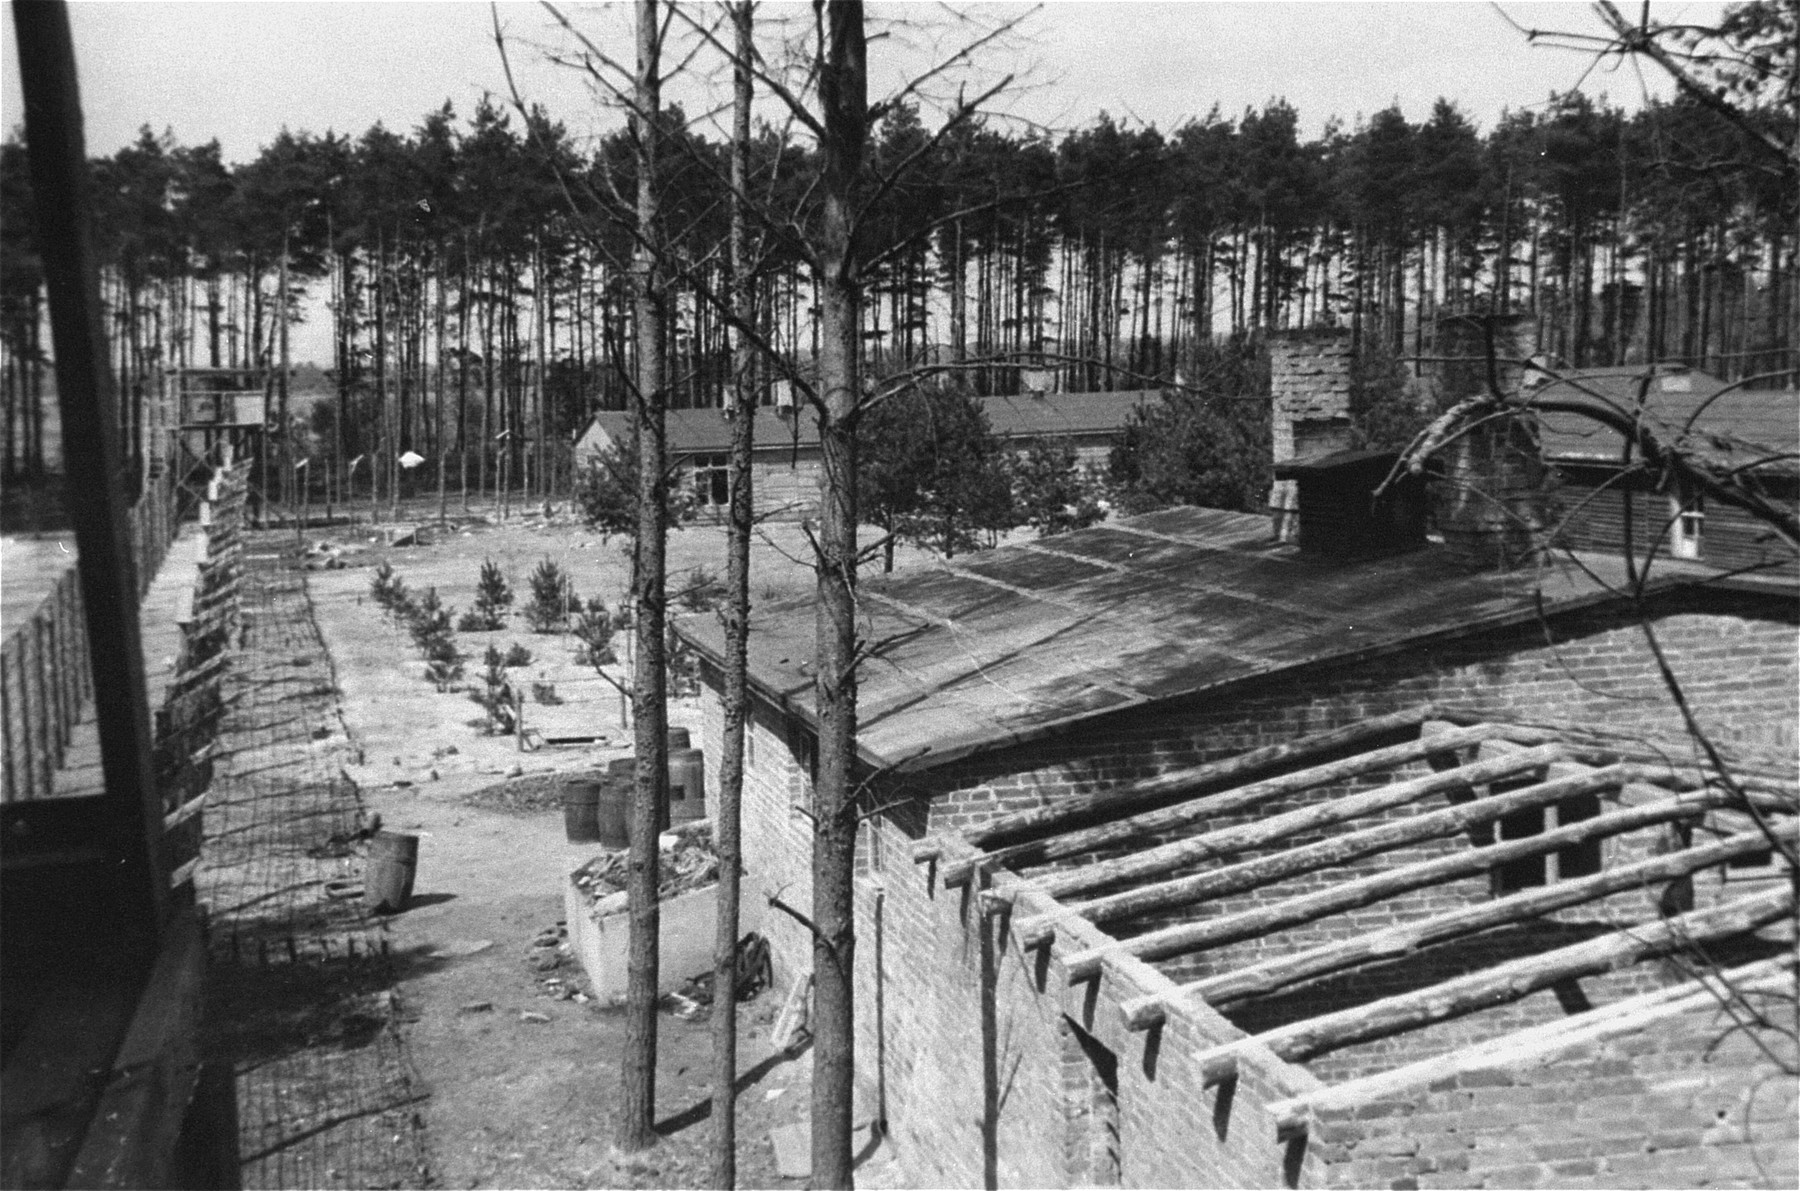 View of the women's camp at Woebbelin as seen from a guard tower.